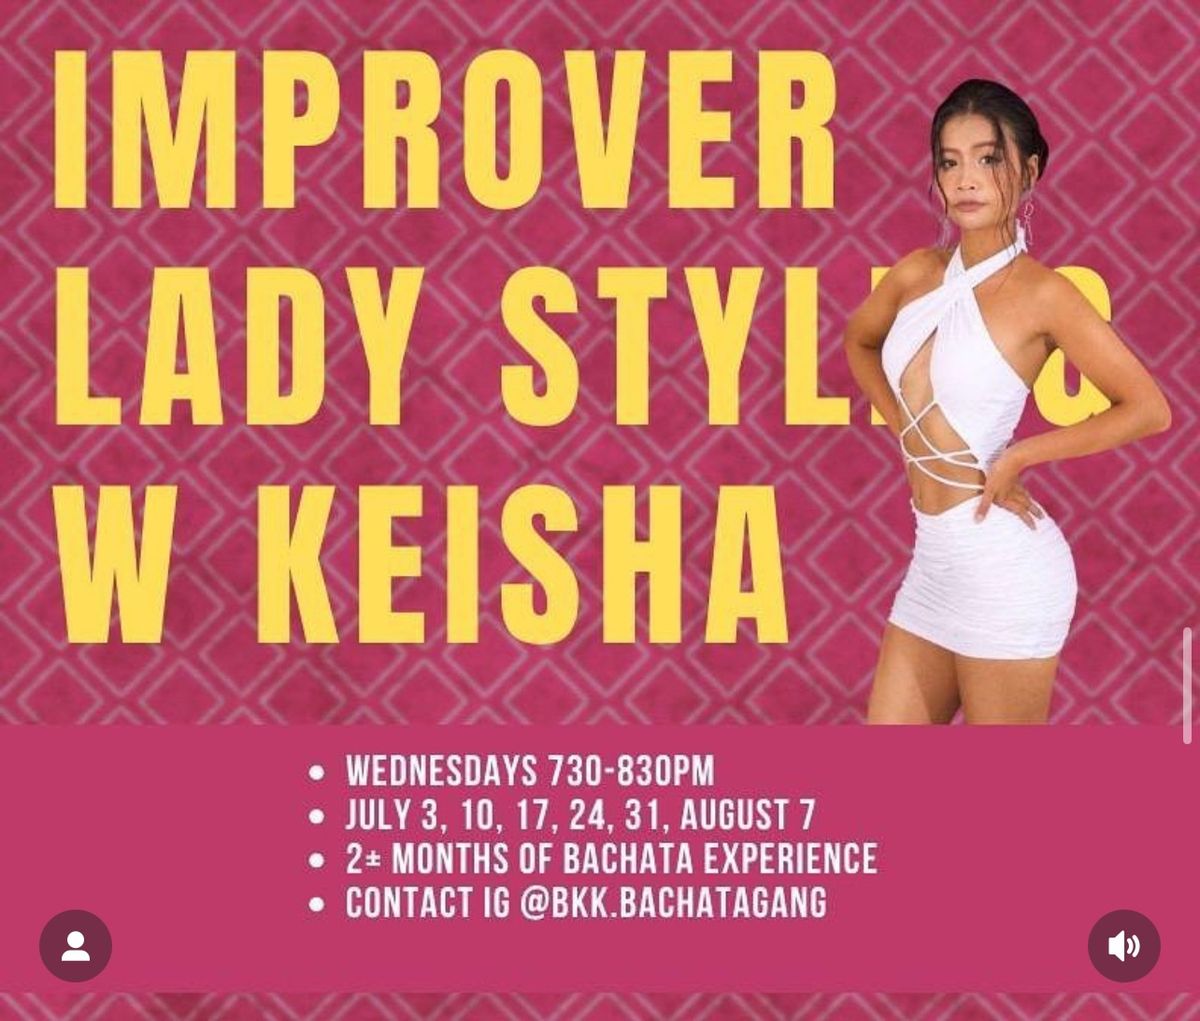 Bachata Lady Styling IMPROVER course (Choreography)